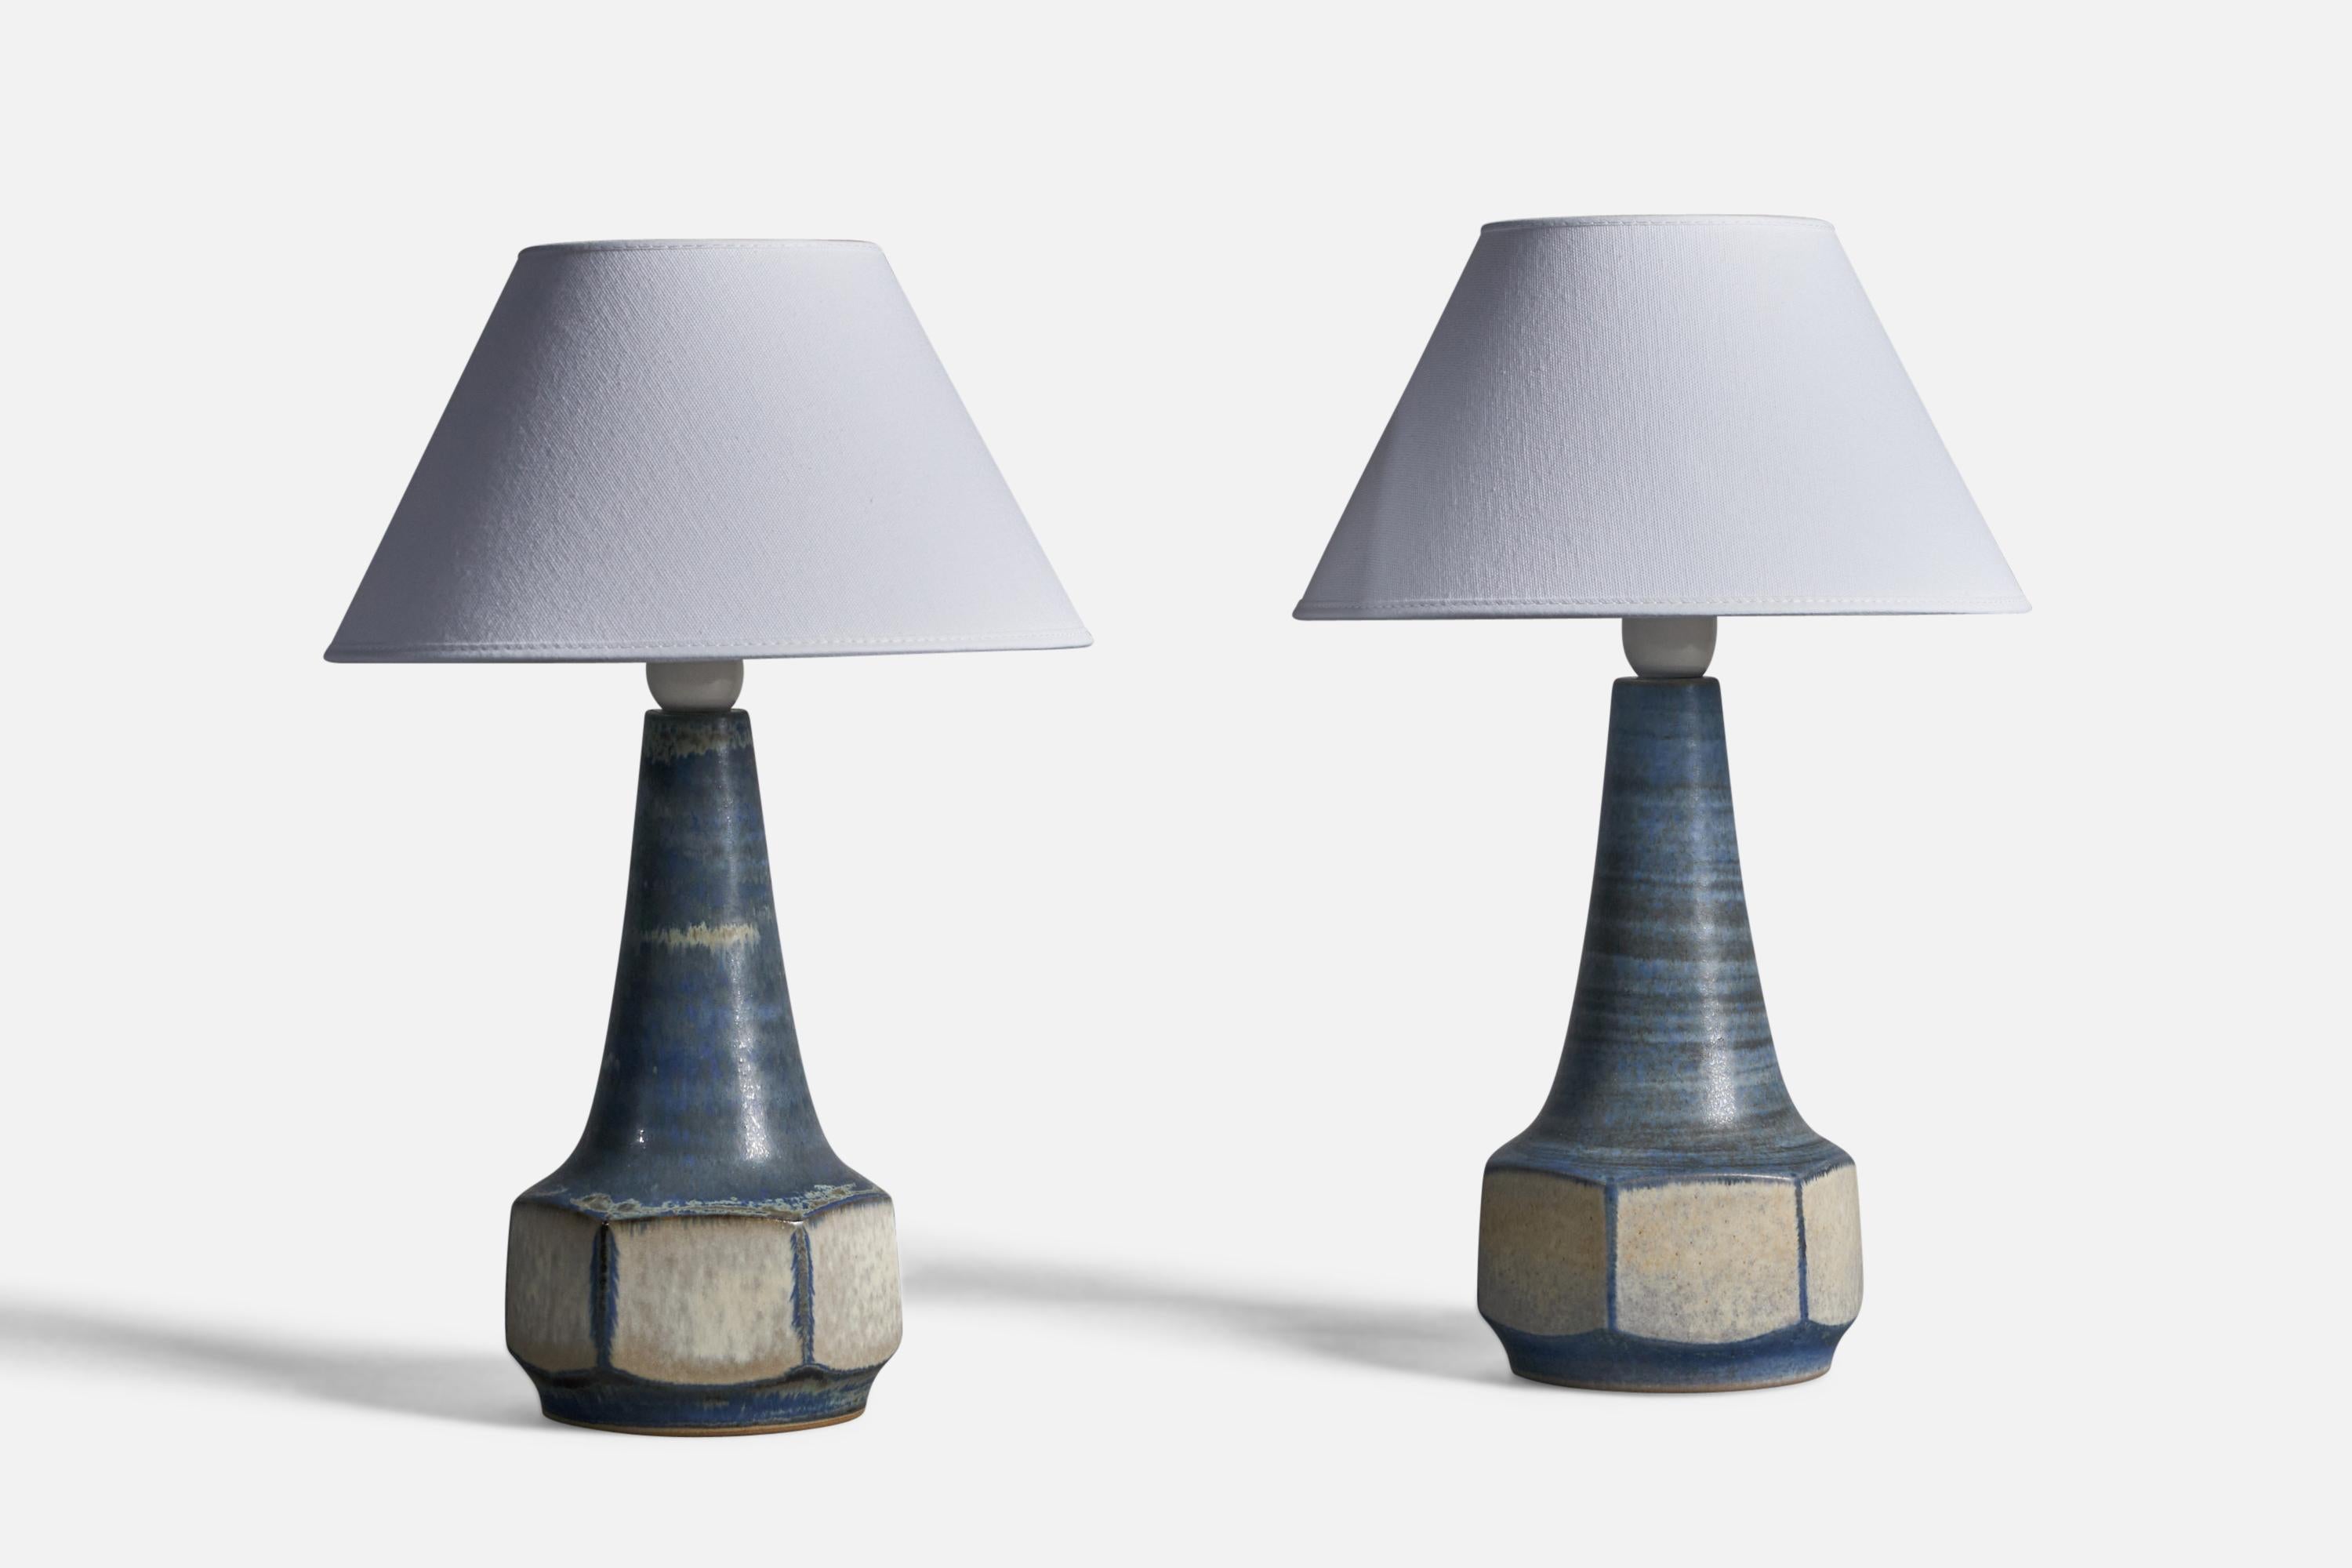 A pair of blue and grey glazed stoneware table lamps, designed by Marianne Starck and produced by Michael Andersen, Bornholm, Denmark, 1960s

Dimensions of Lamp (inches): 12.25